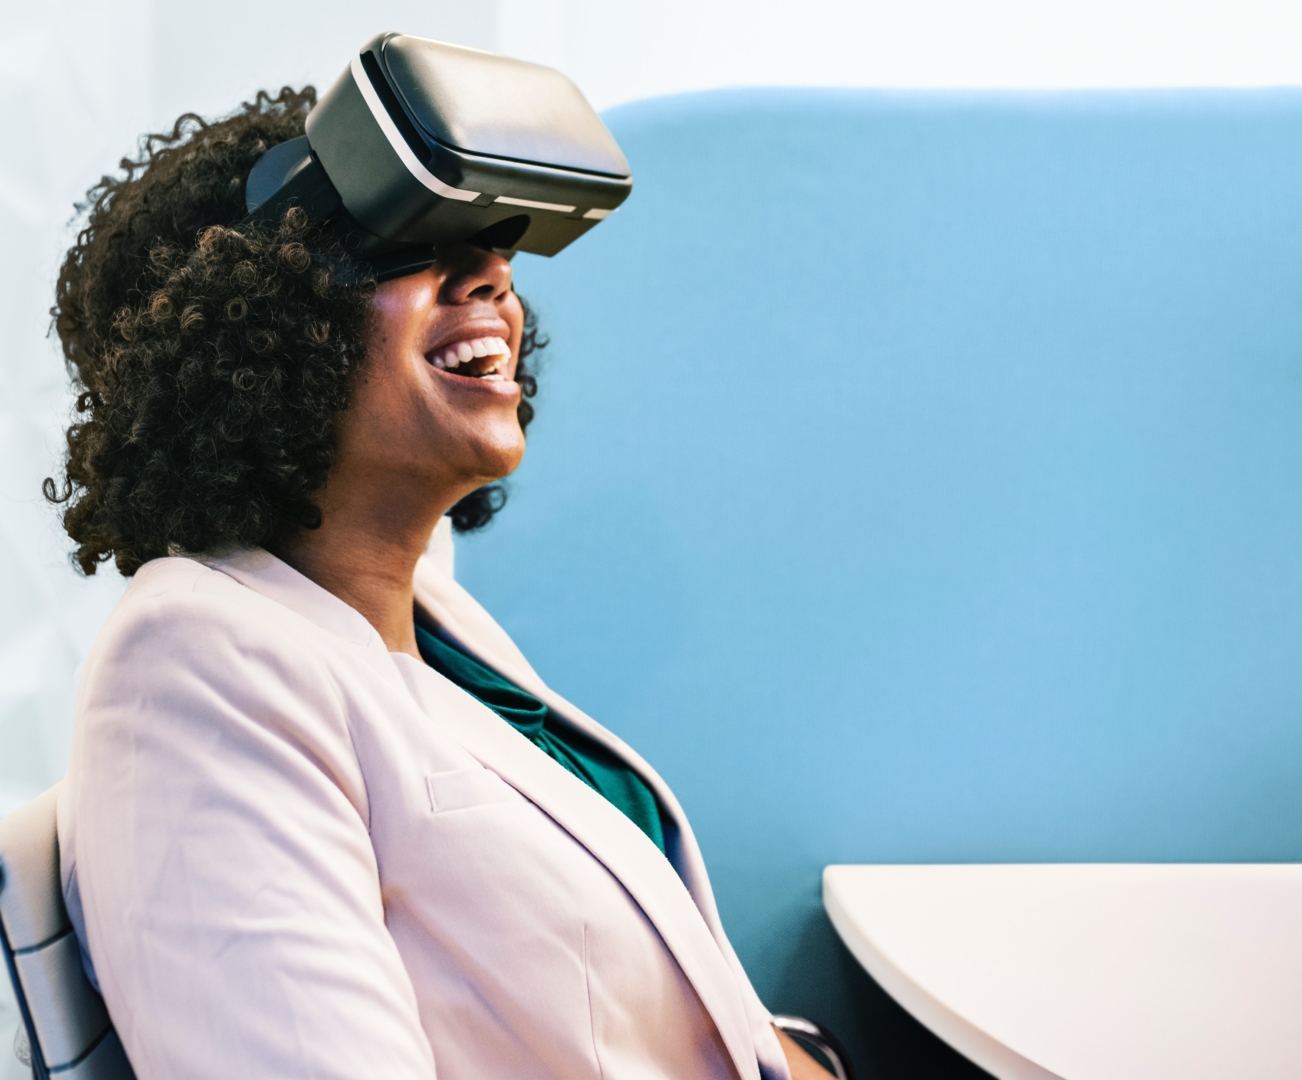 a woman using a VR device for training purposes and smiling